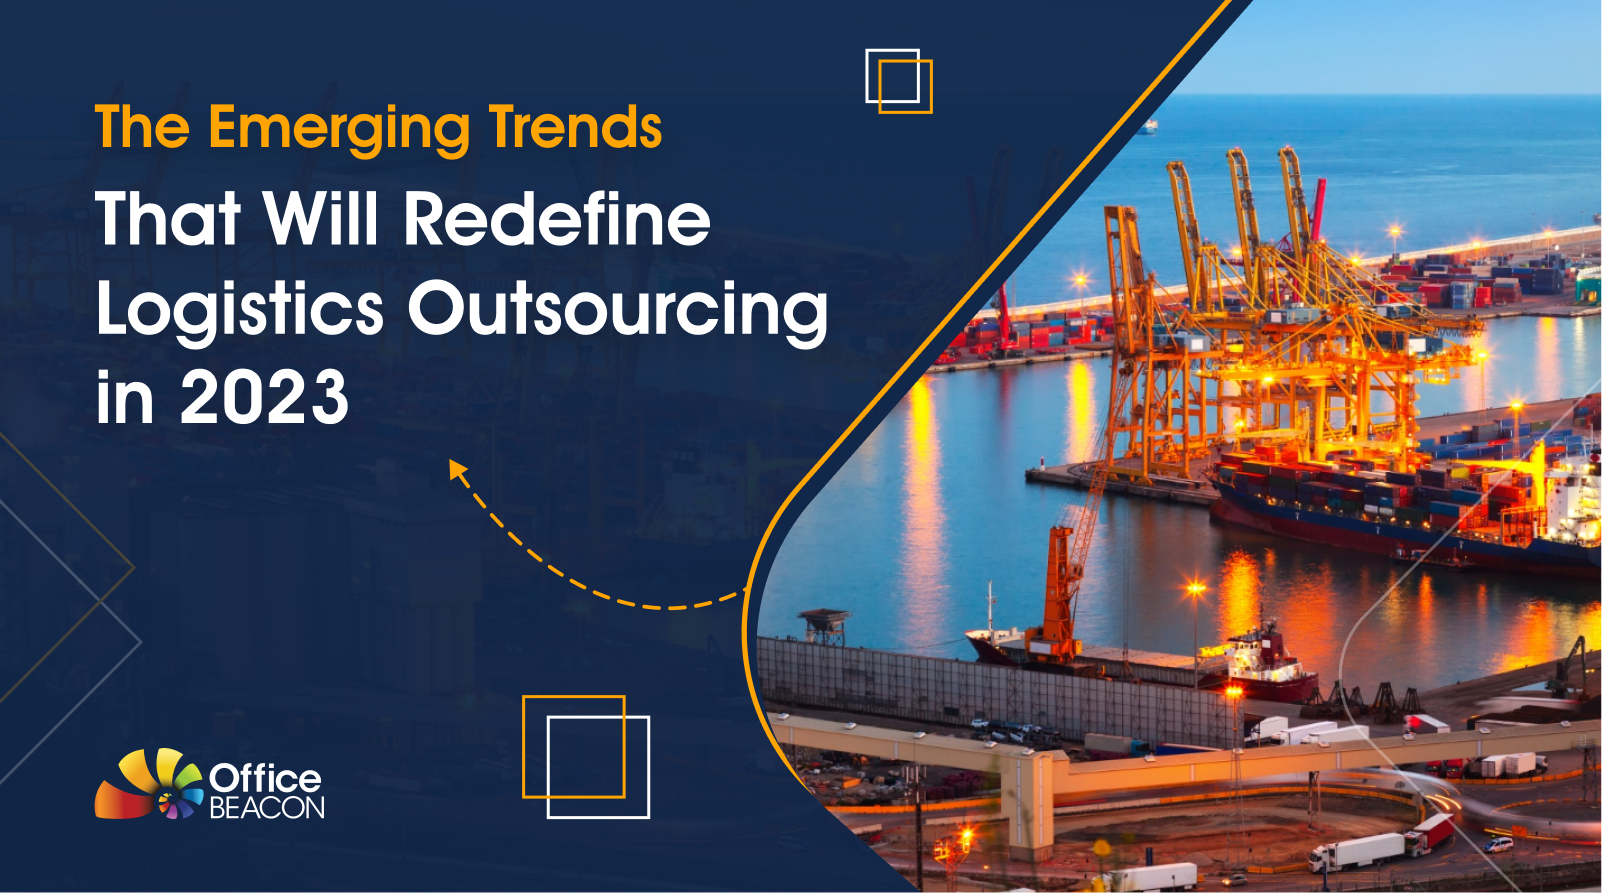 The Emerging Trends That Will Redefine Logistics Outsourcing in 2023